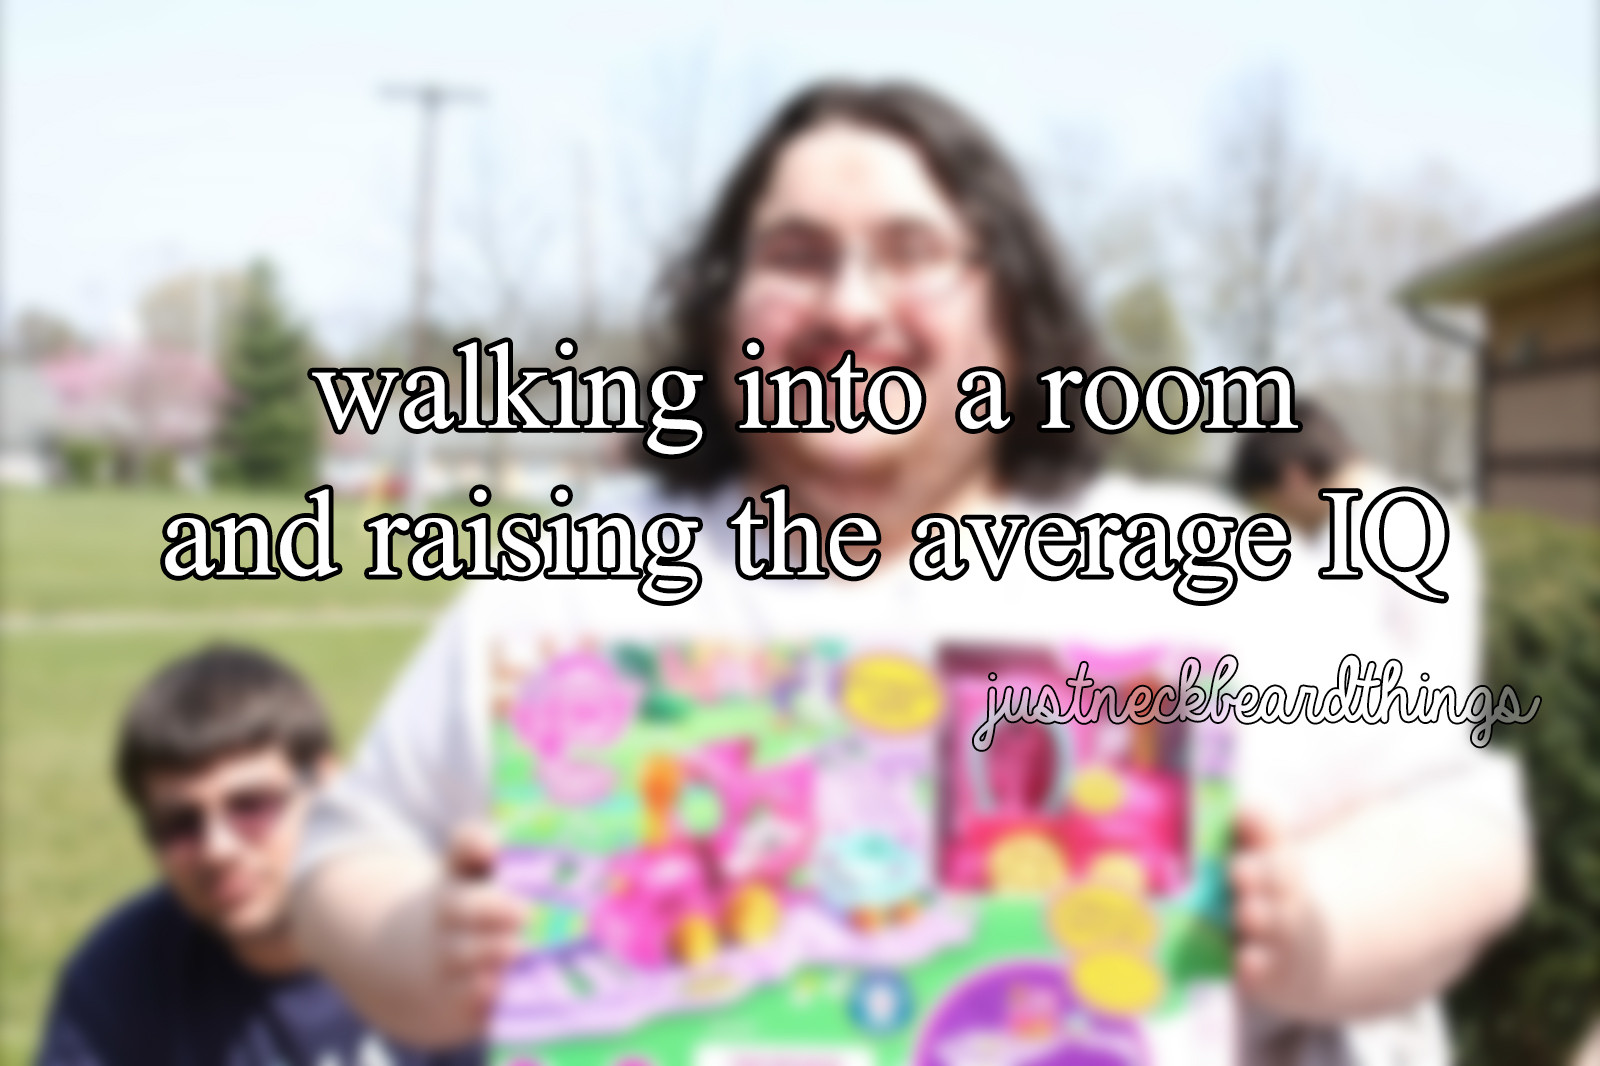 best cringe - walking into a room and raising the average Iq pestiredkleandthings